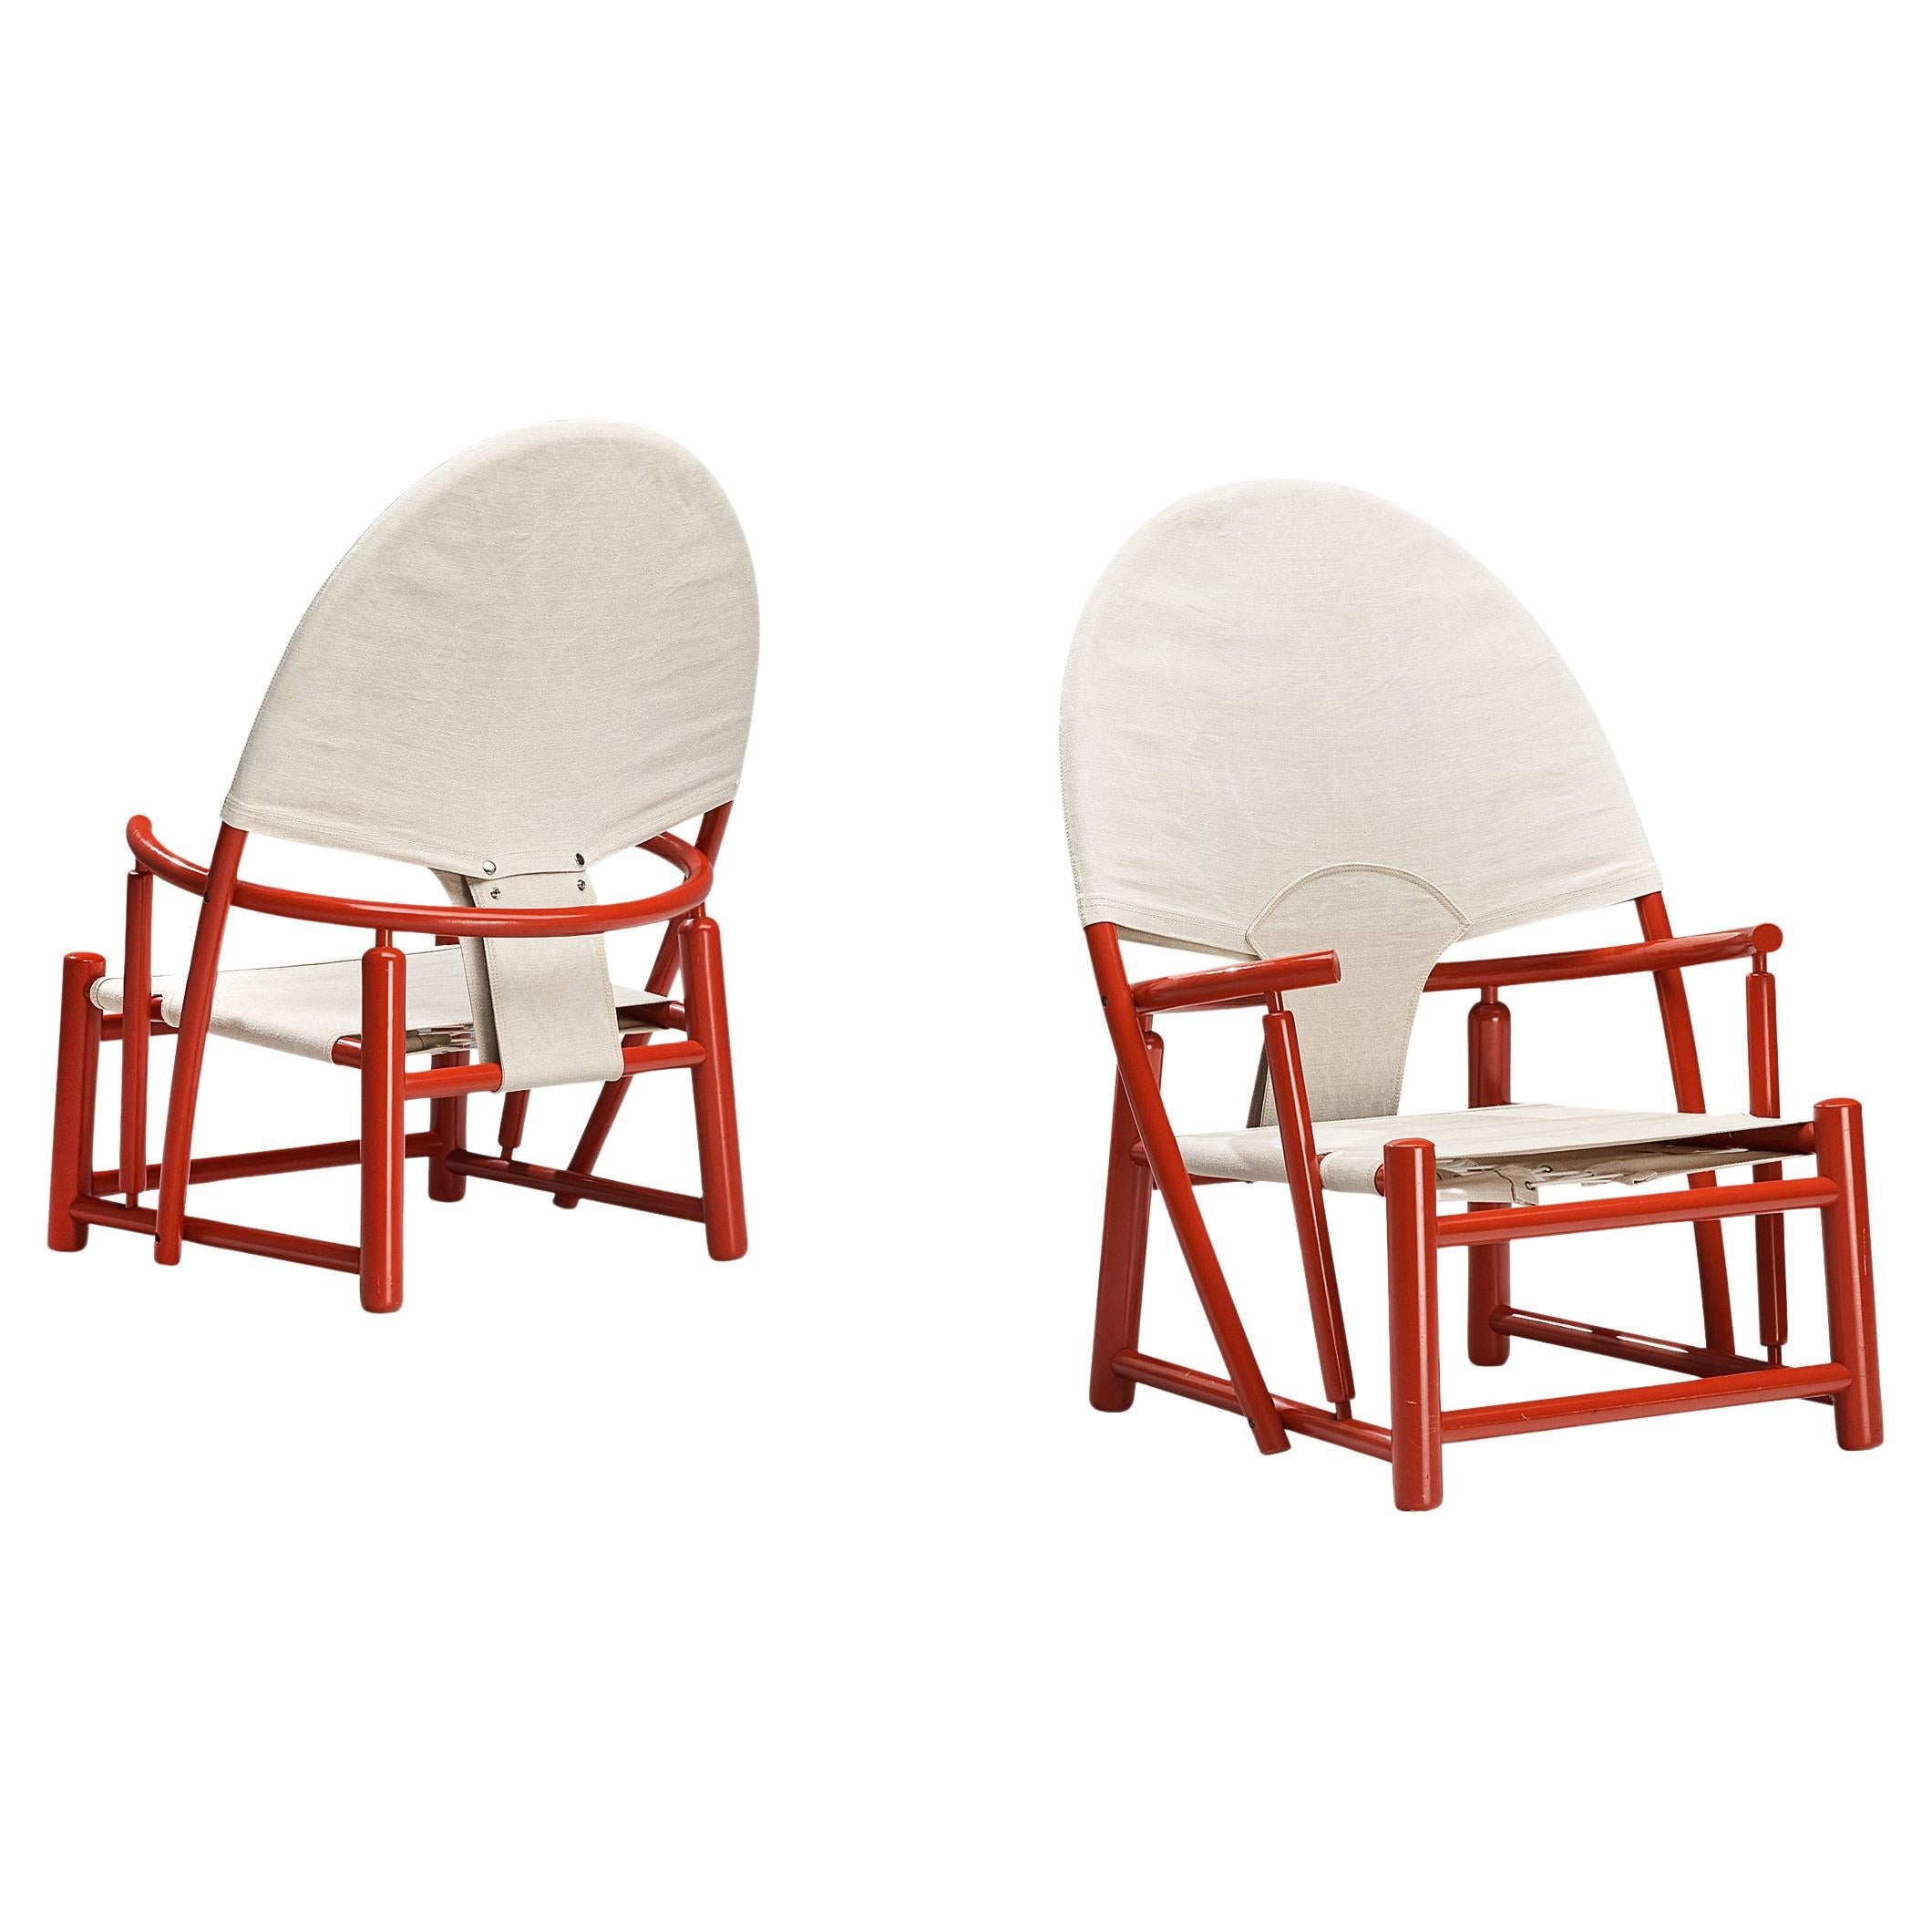 Werther Toffoloni & Piero Palange Pair of ‘Hoop’ Red Chairs in Canvas 